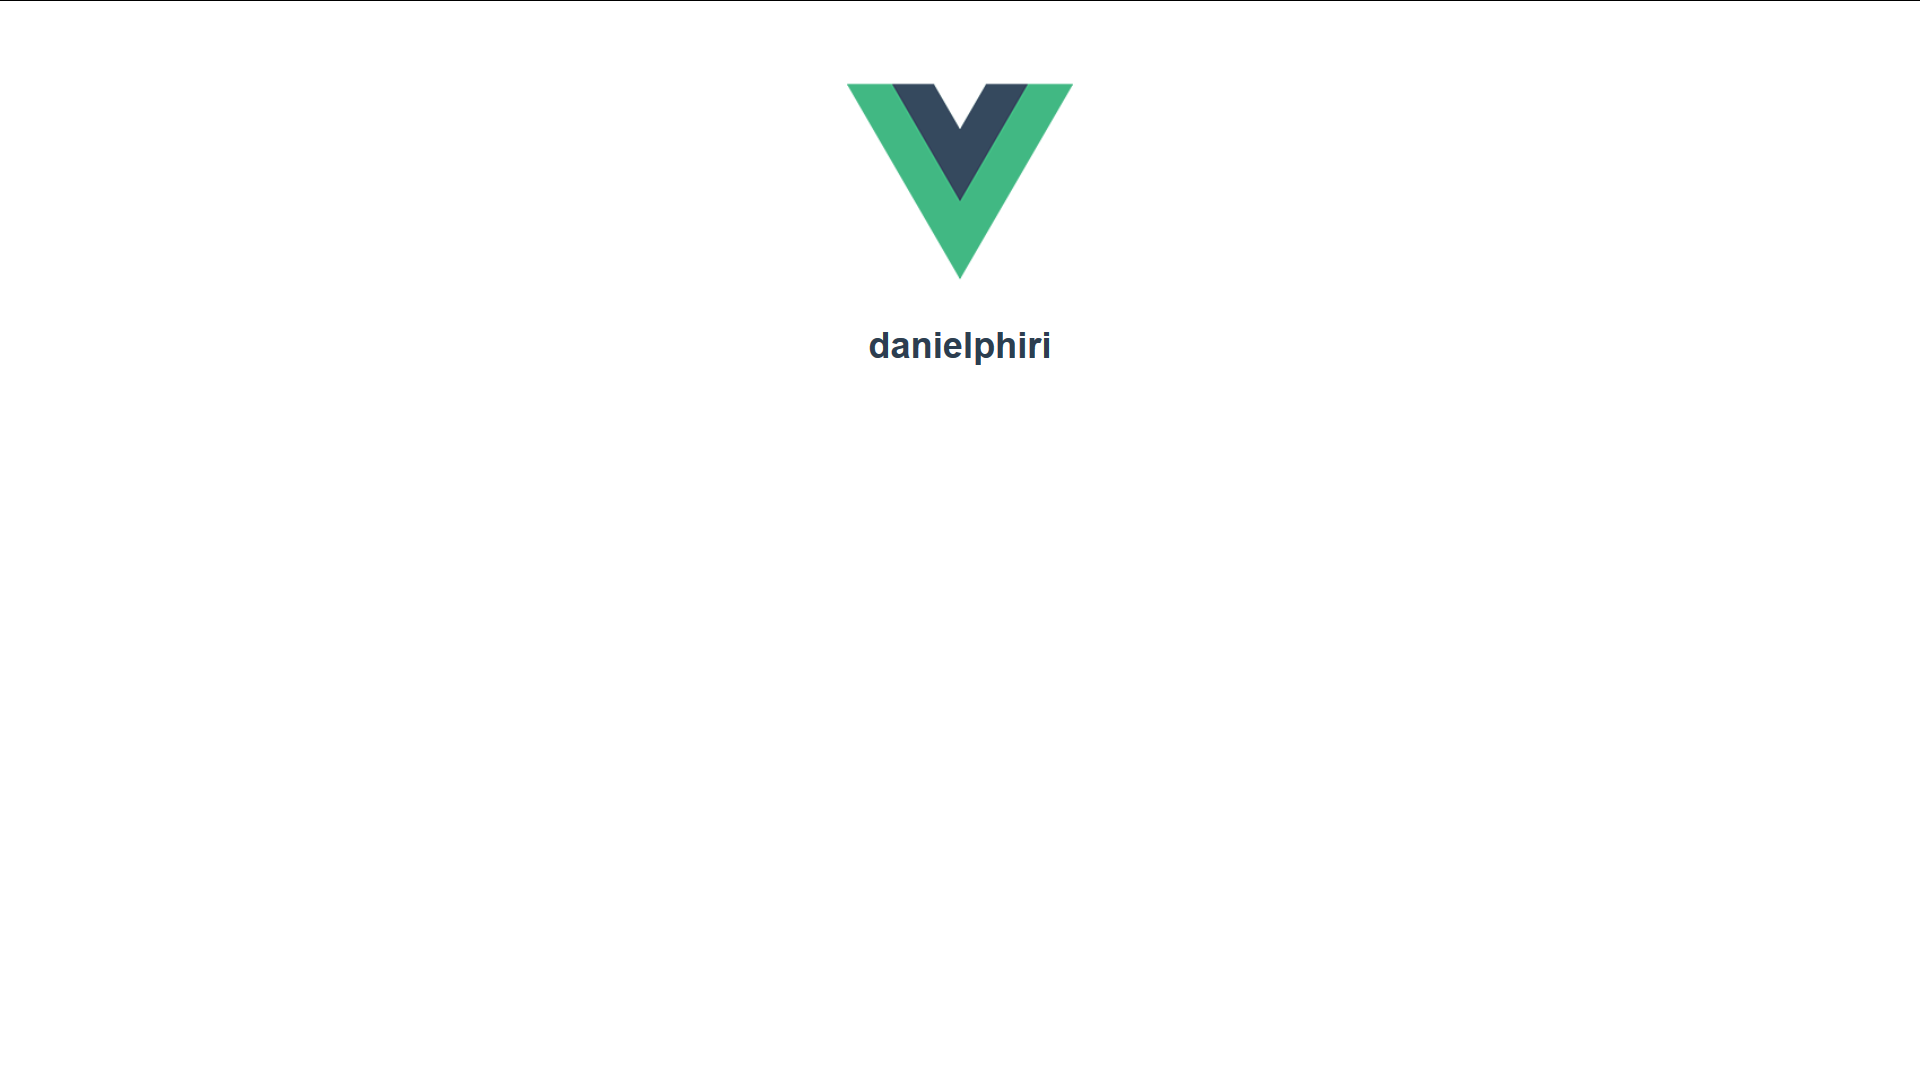 An image of the username value entered into the Vue app store.